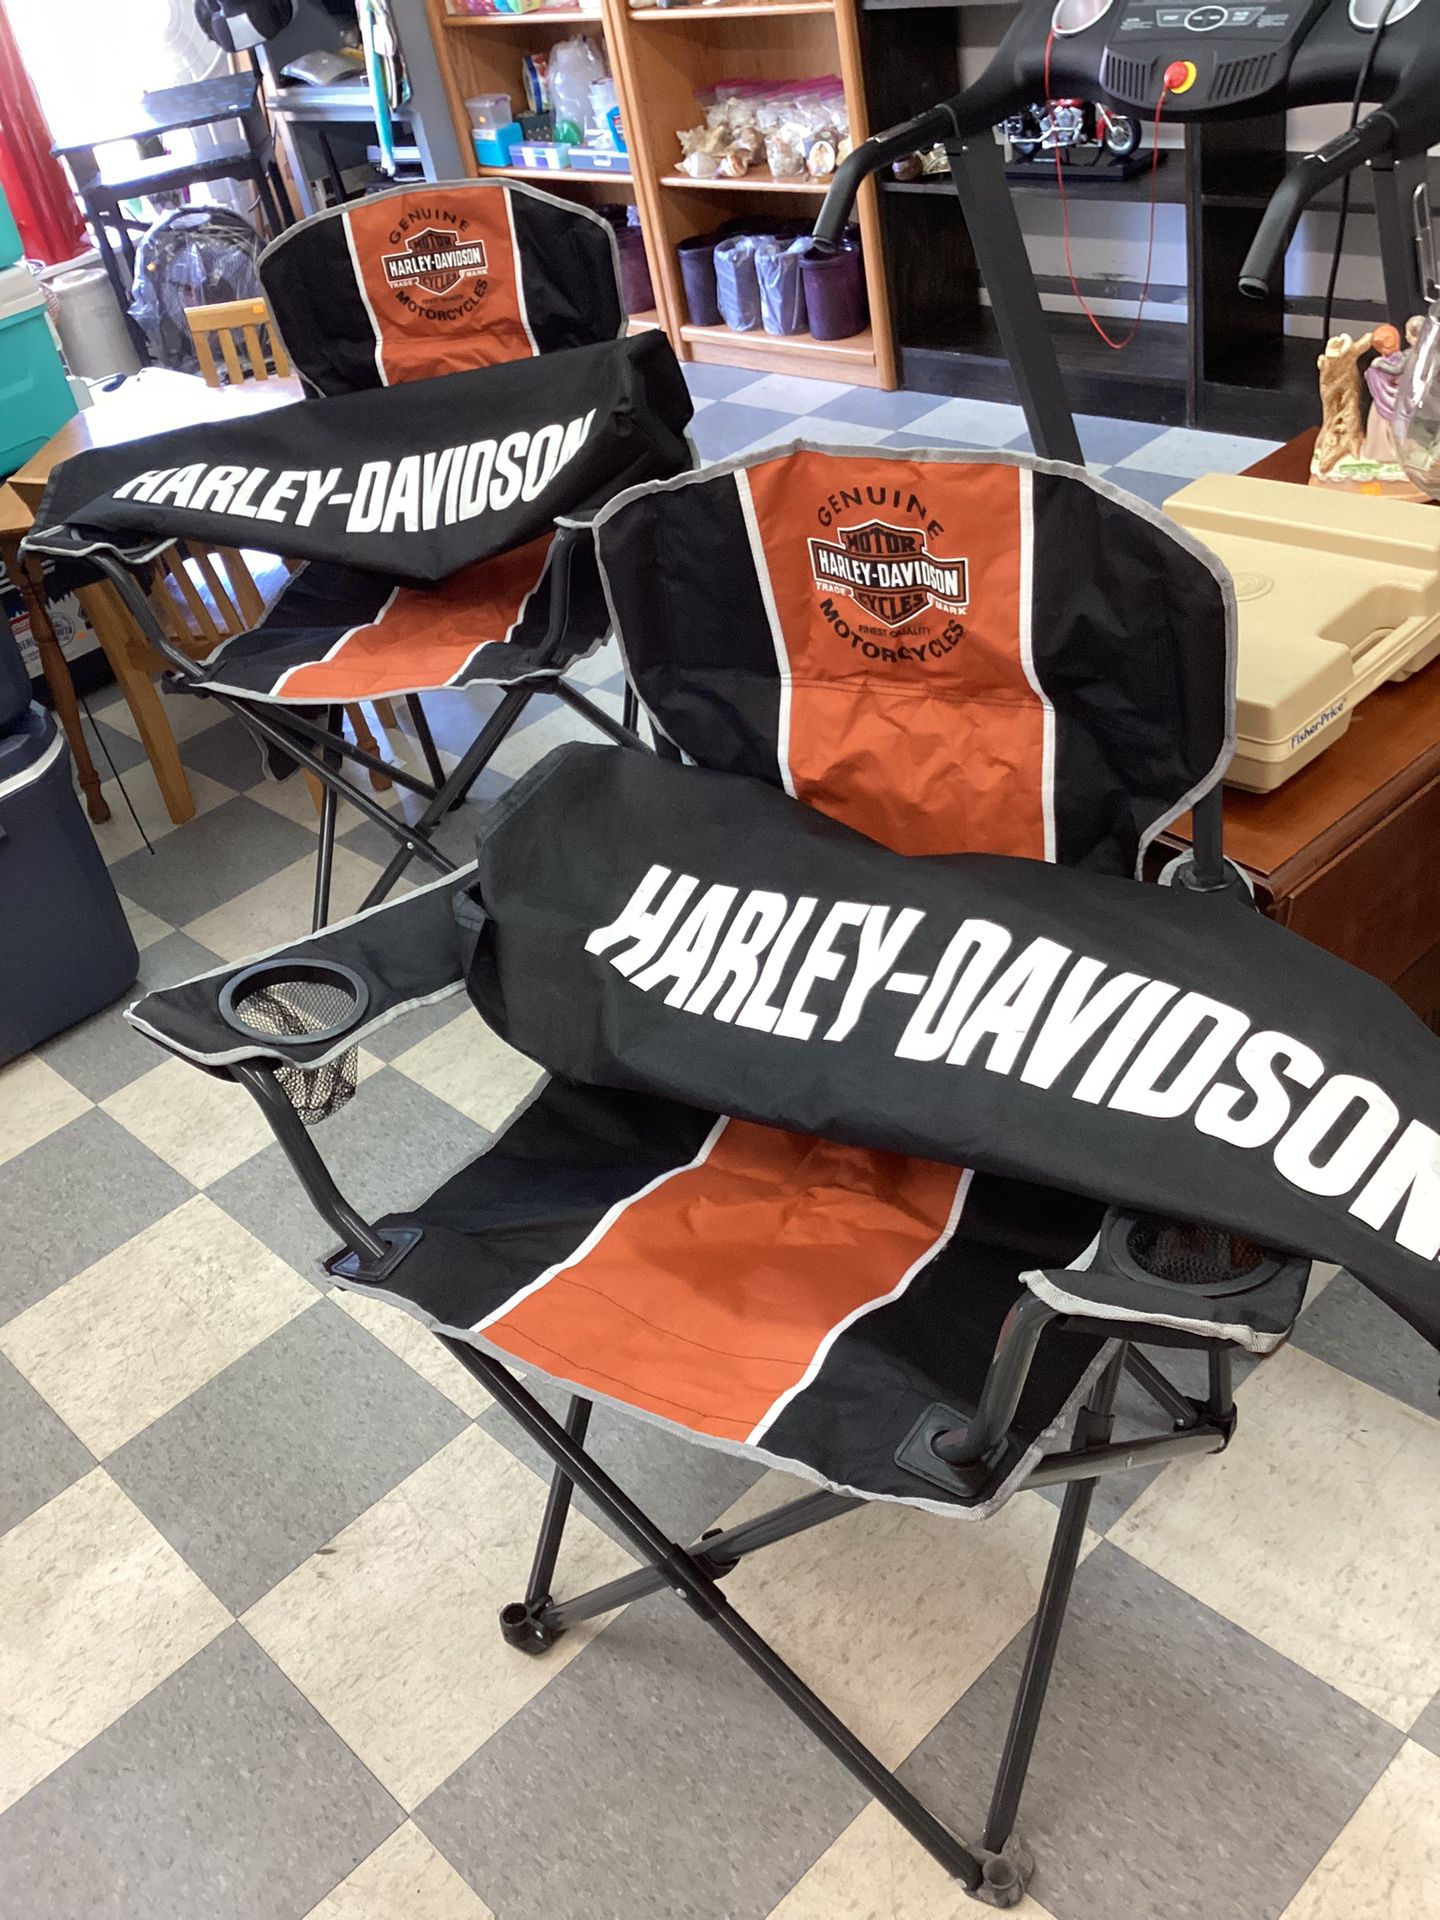 Harley Davidson Memorabilia -Ride on over to I 2nd That! Check out our new Harley Davidson items. Something for everyone!